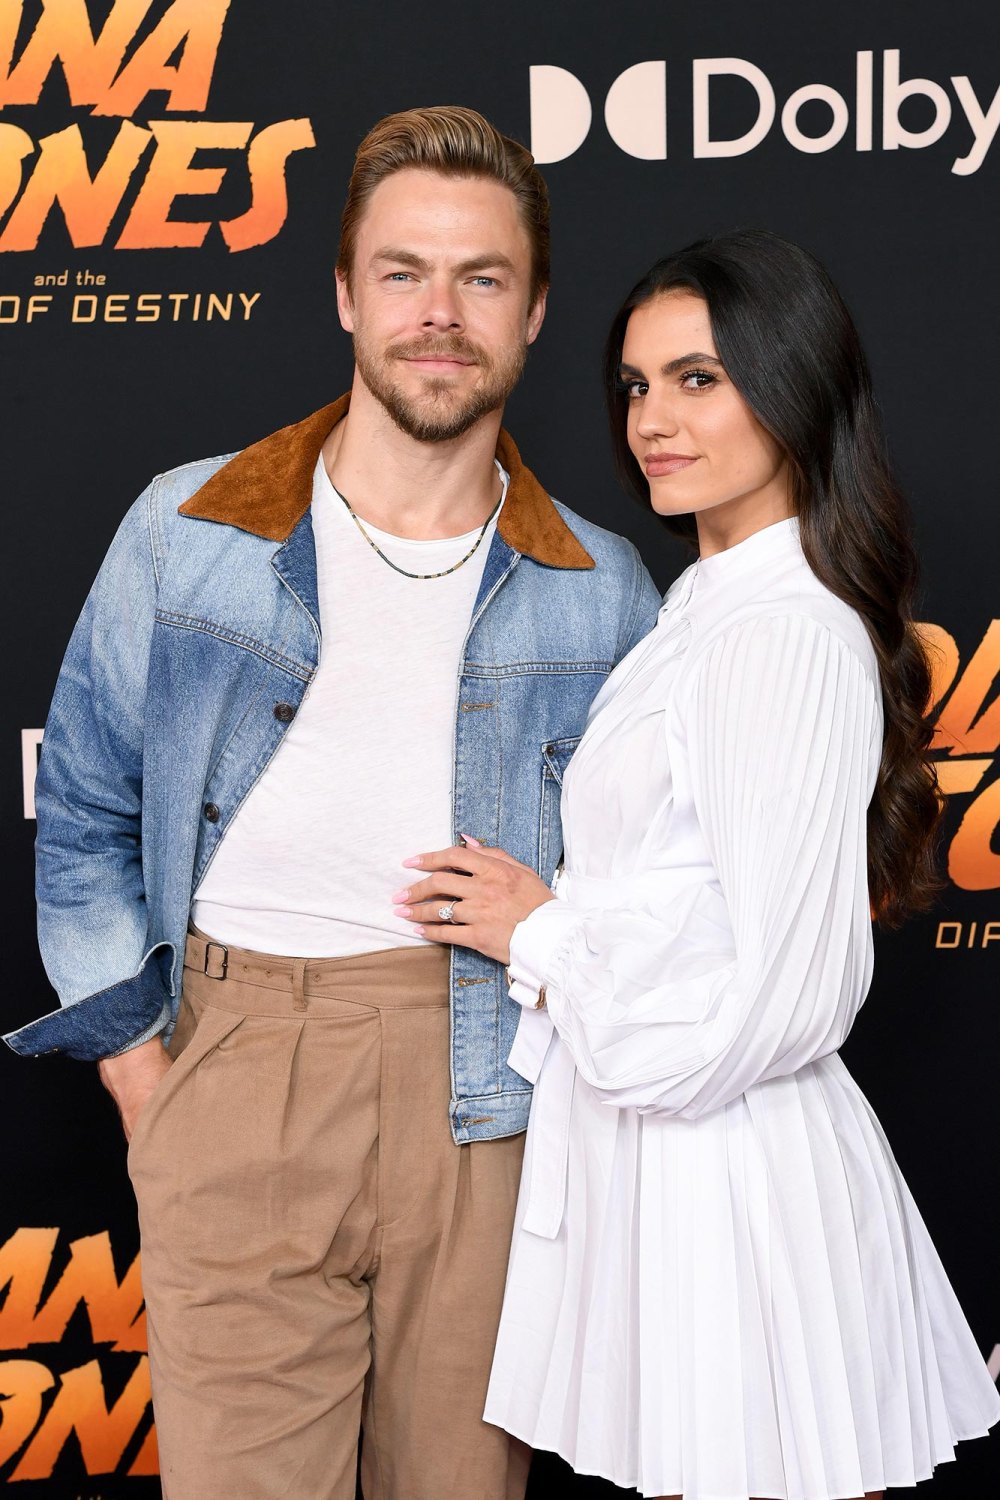 Derek Hough Says Wife Hayley Erbert Is on Path to a Full Recovery After Successful Cranioplasty Surgery